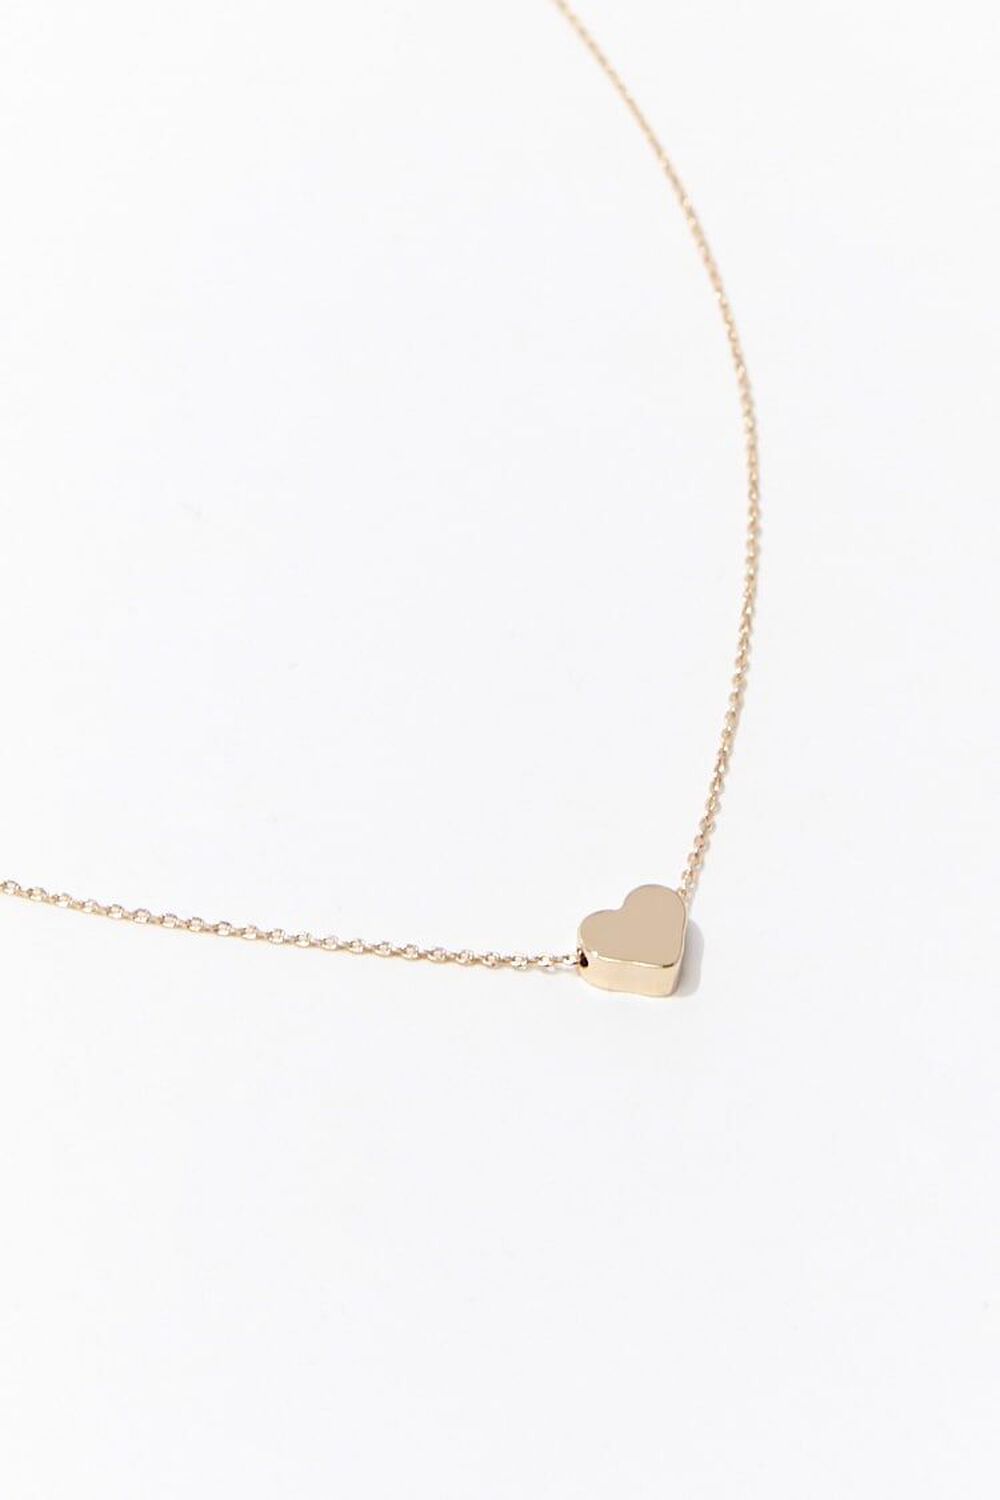 GOLD Heart Charm Necklace, image 1